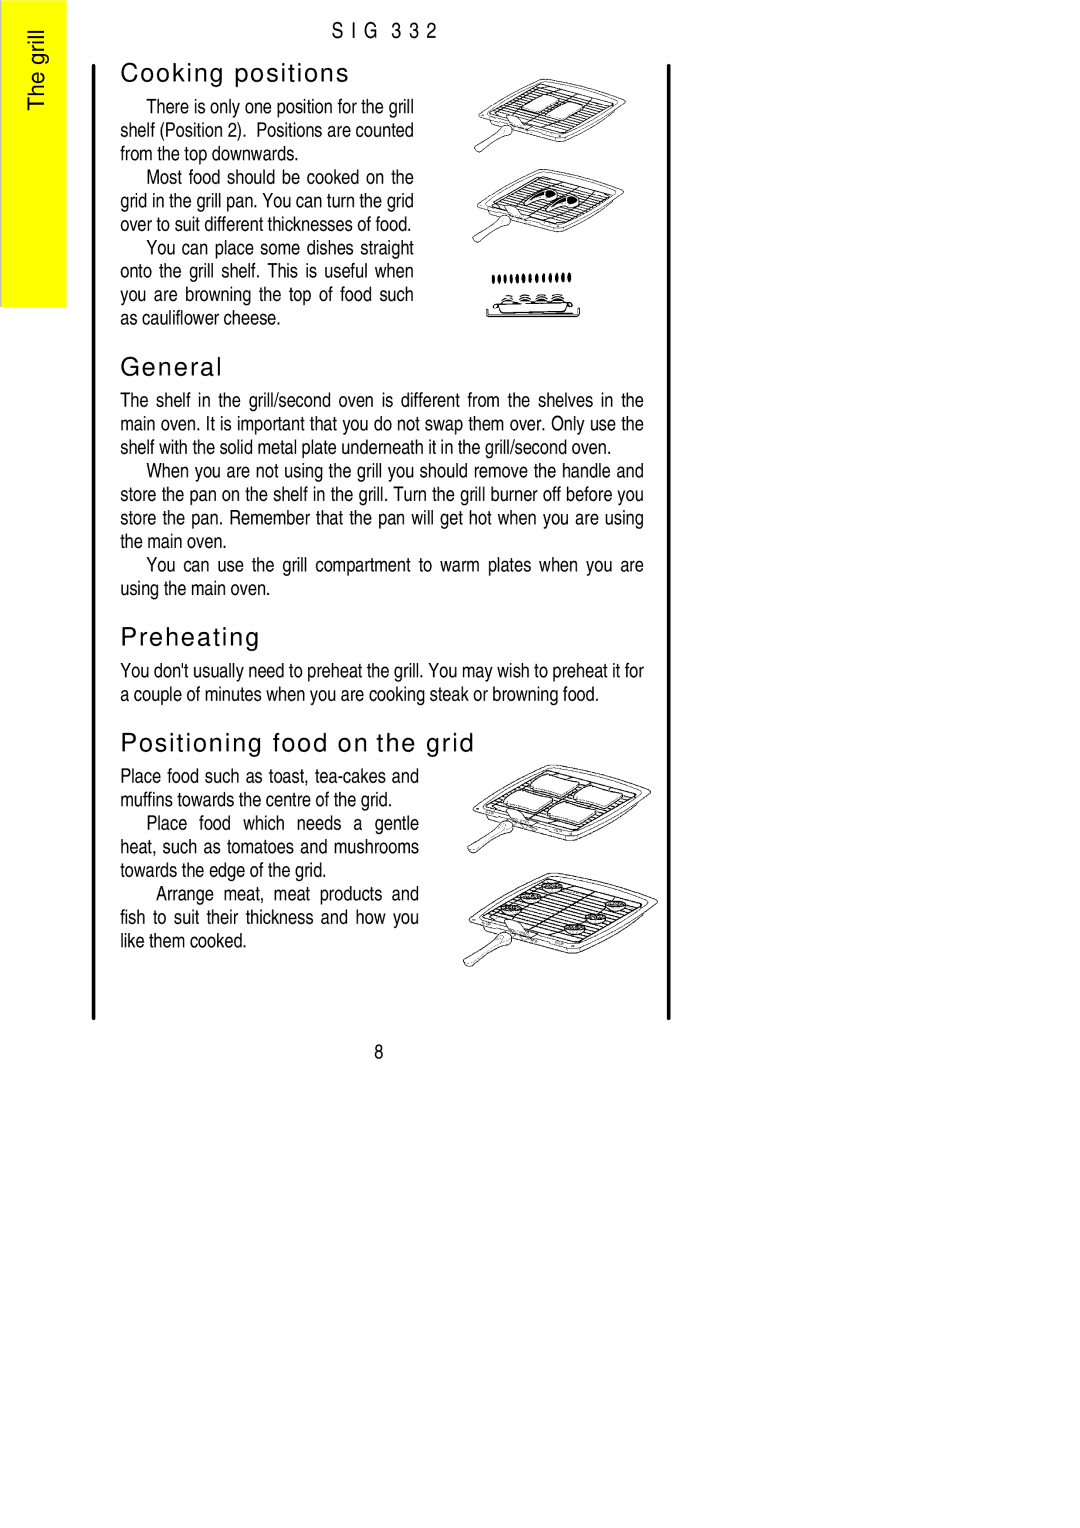 Electrolux SIG 332 installation instructions Cooking positions, General, Preheating, Positioning food on the grid 